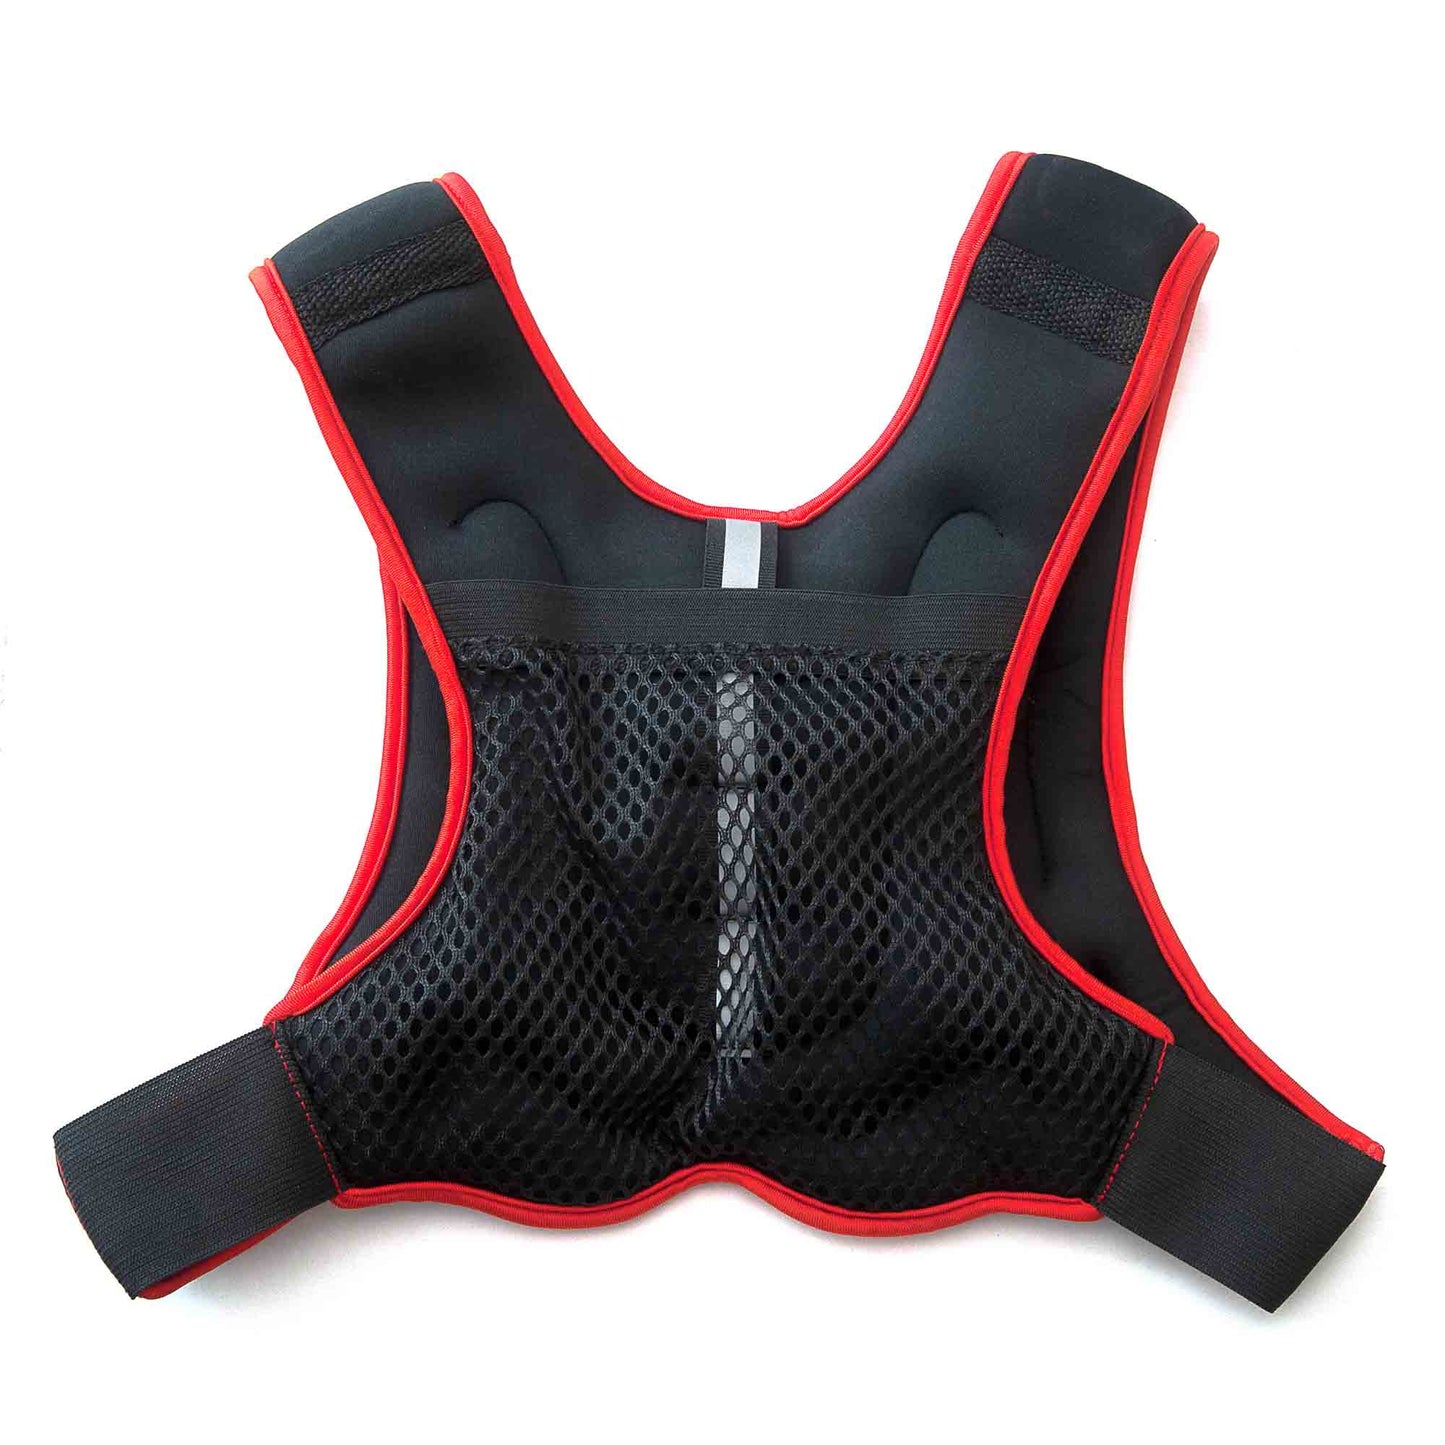 |Viavito 2.5kg Weighted Vest - Back|